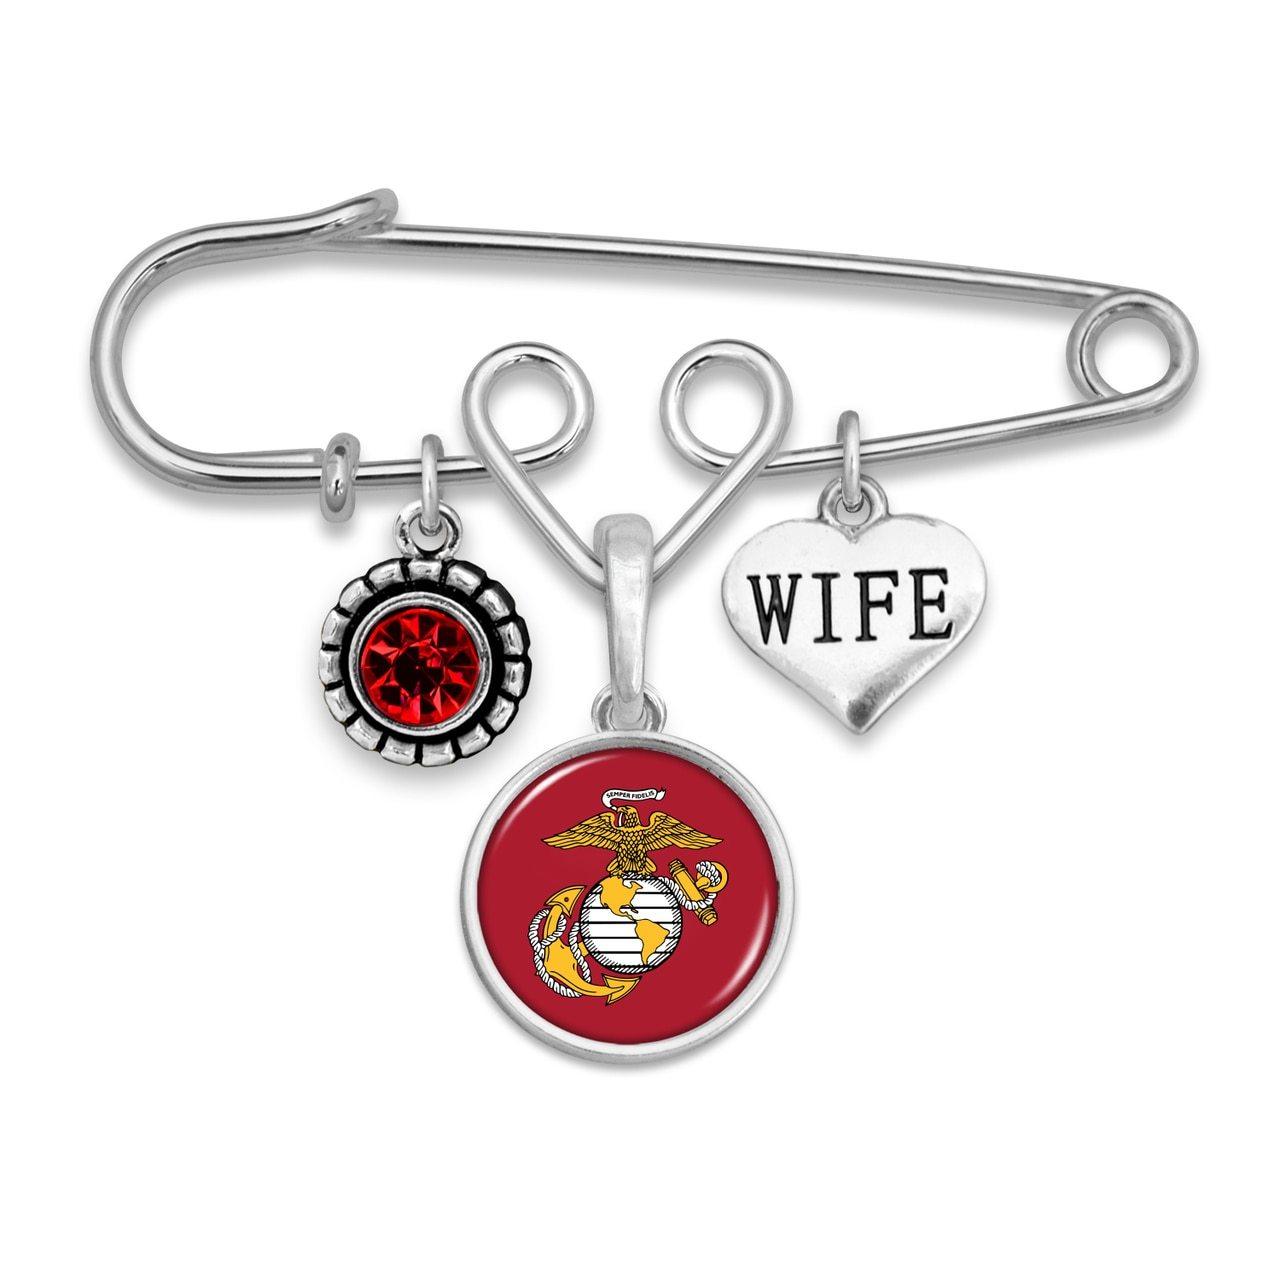 U.S. Marines Triple Charm Brooch with Wife Accent Charm - Military Republic